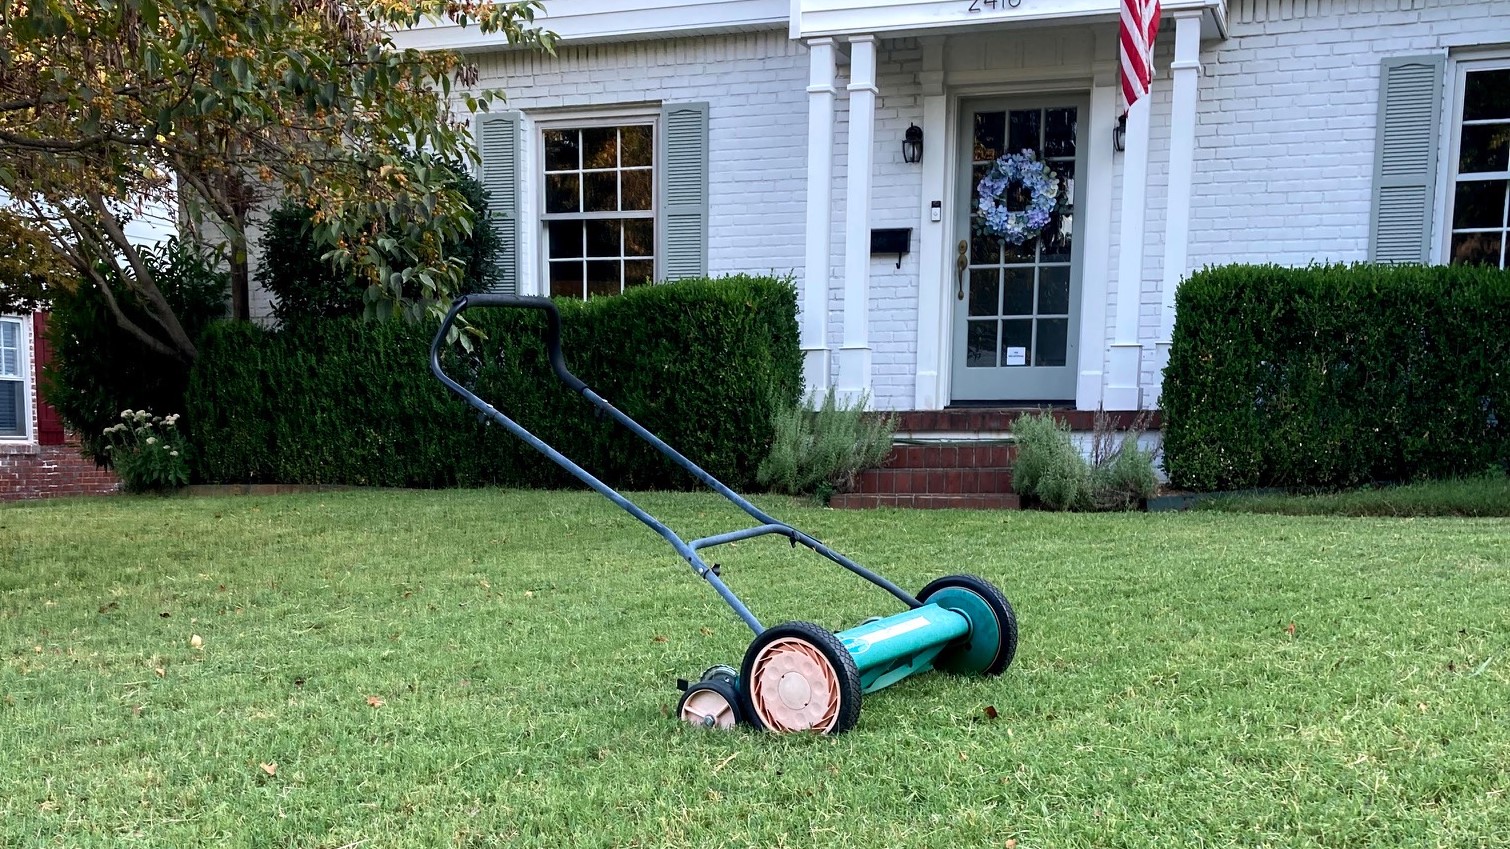 Reel mower on lawn in front of house